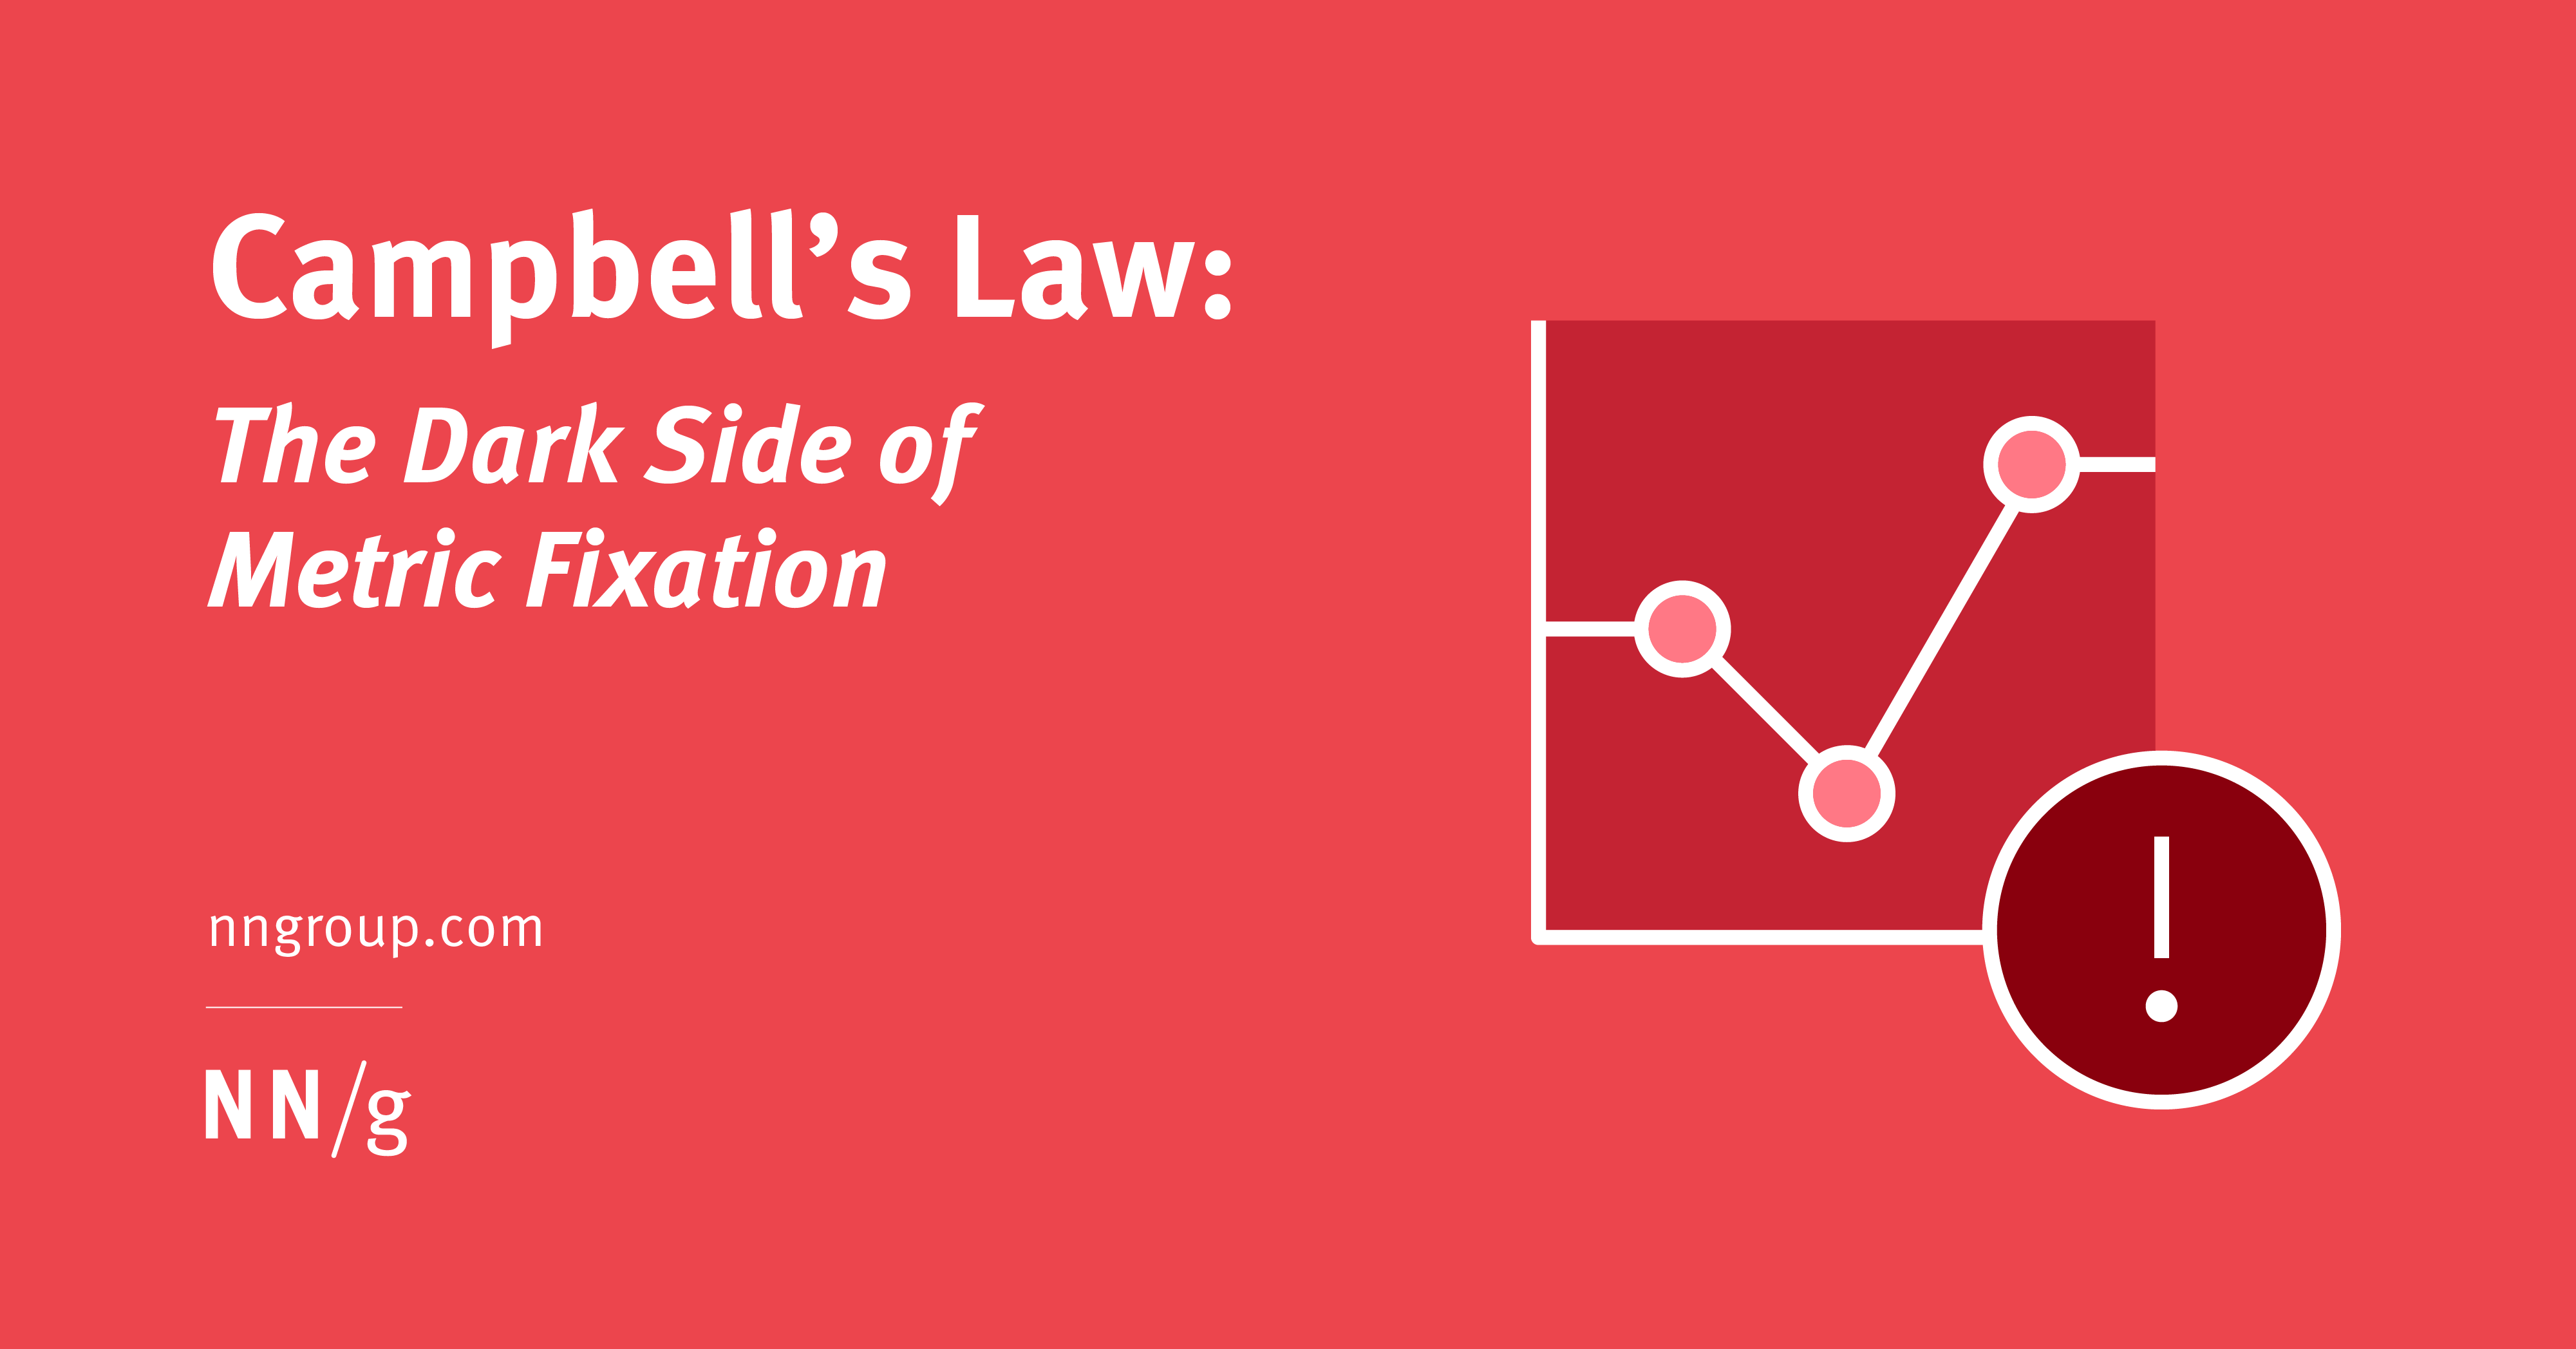 Campbell’s Law: The dark side of metric fixation